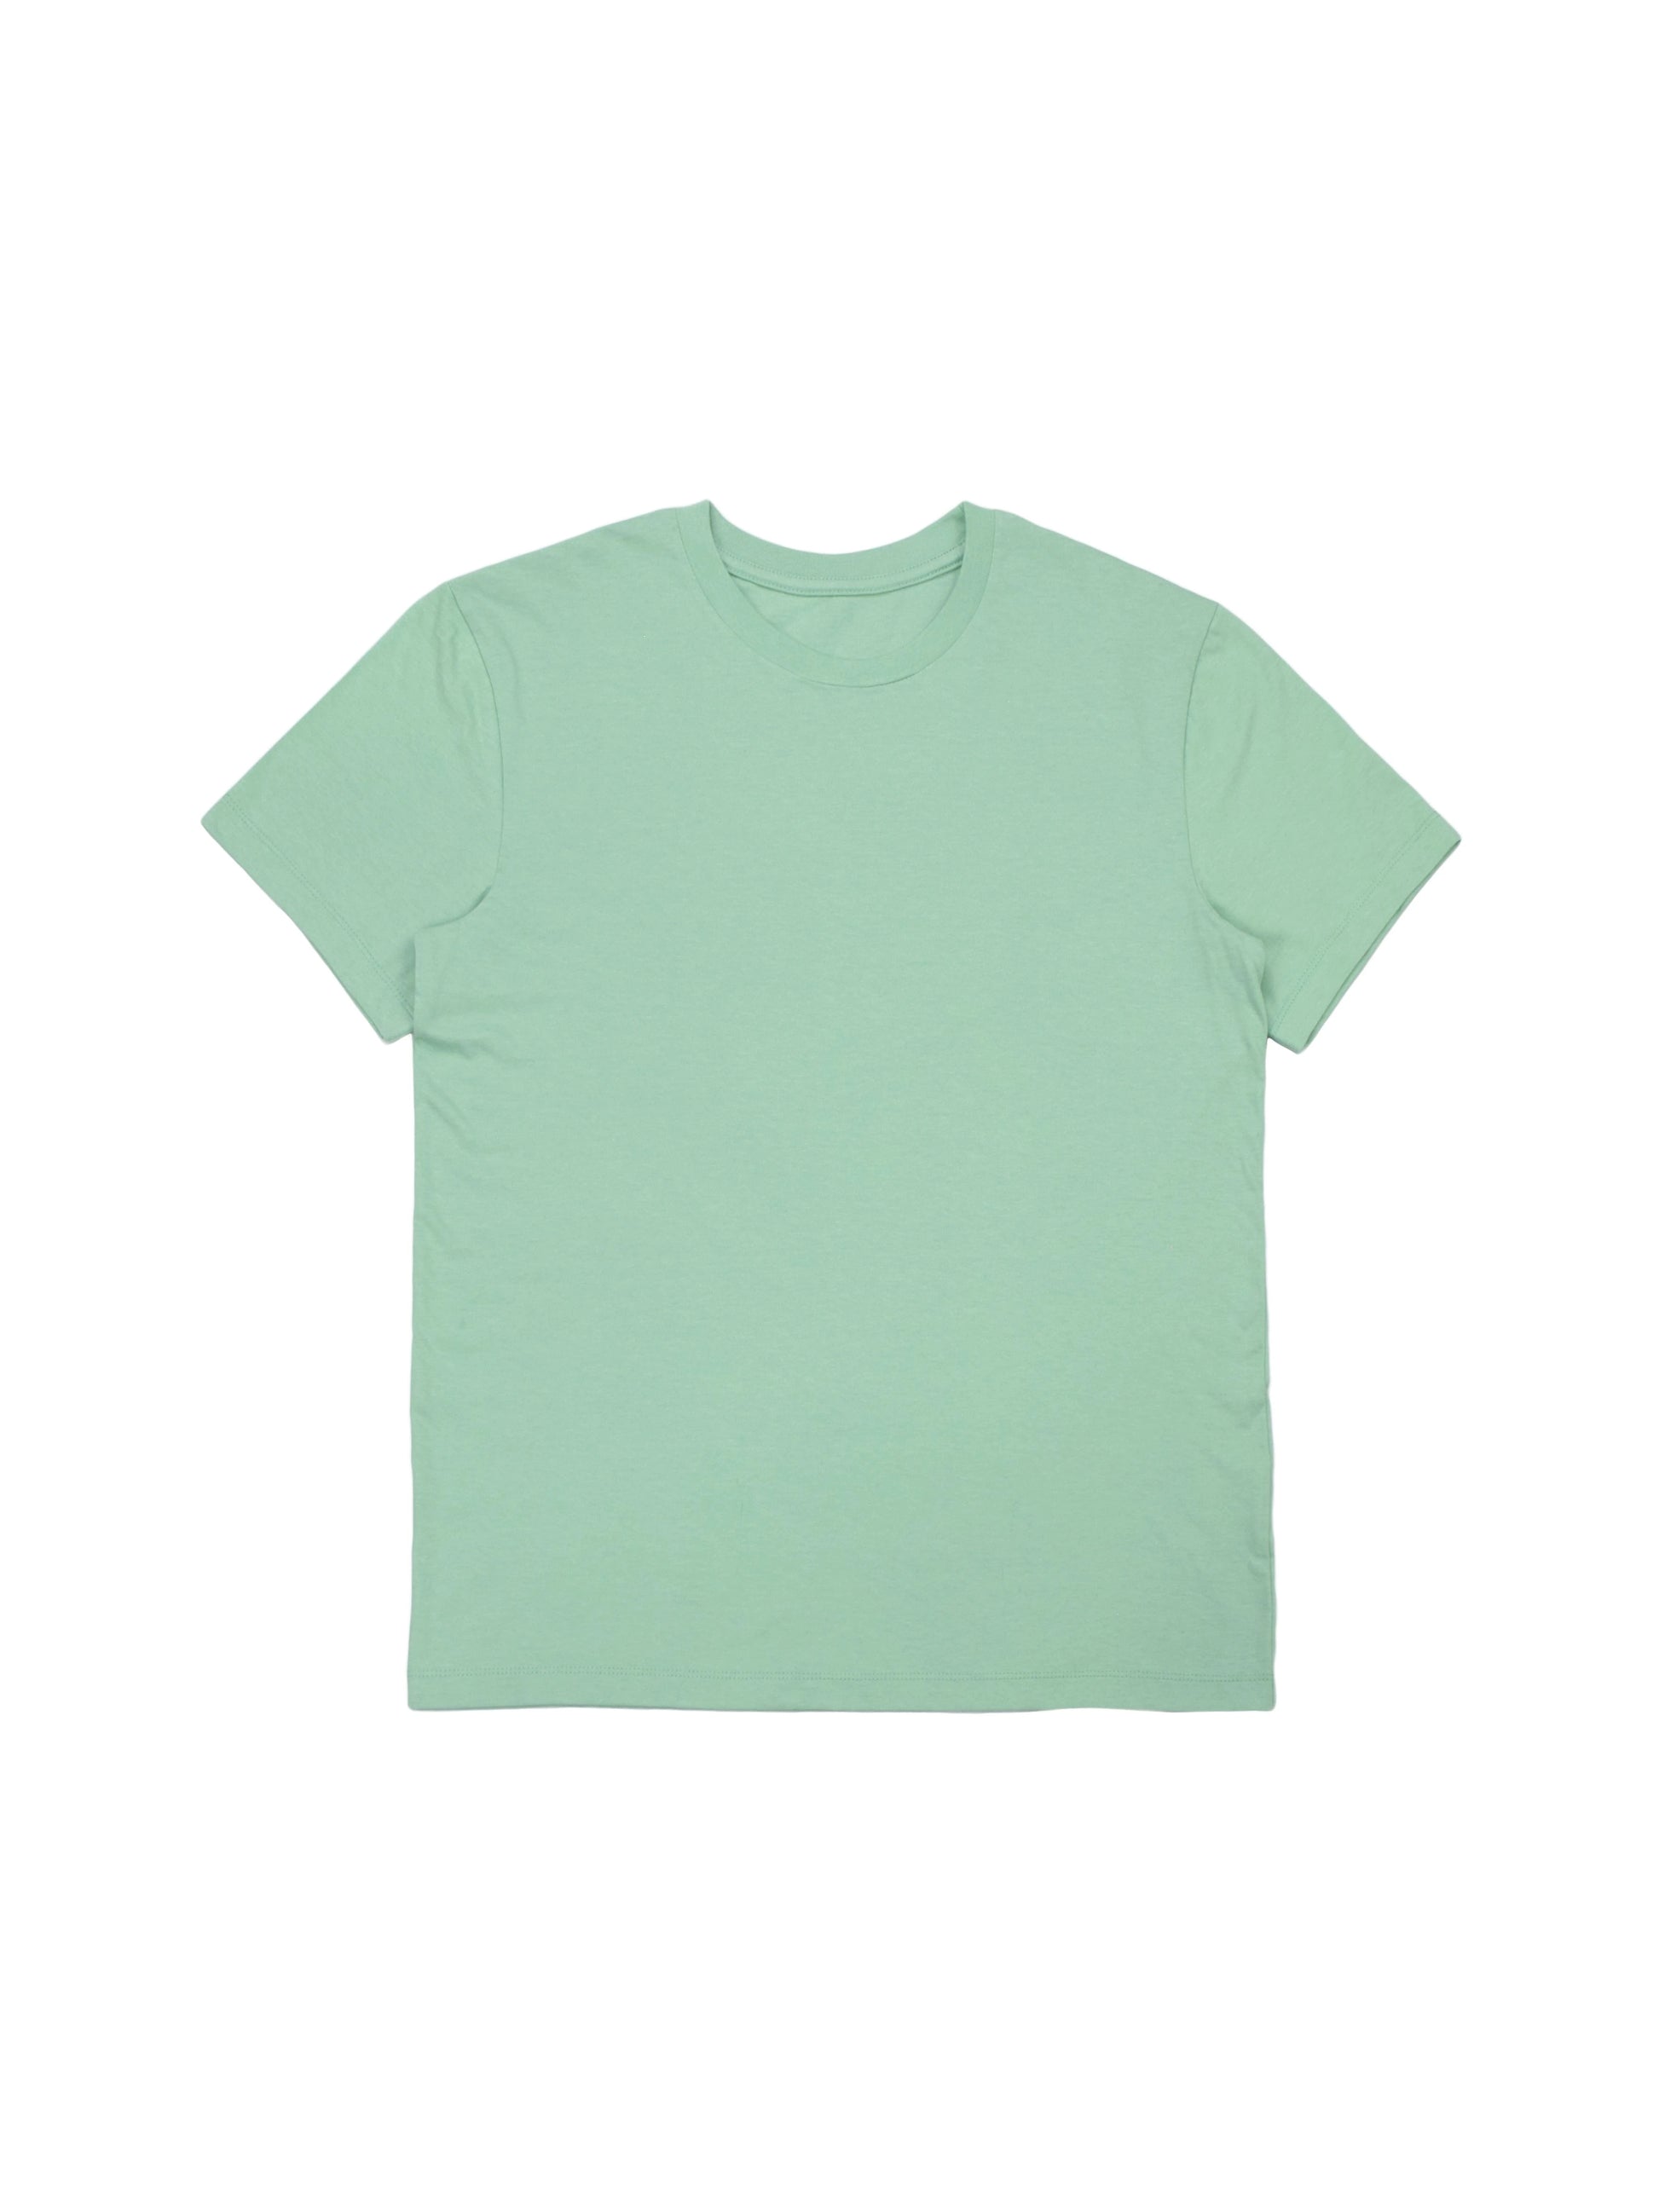 Boxy Fit Mint Green T-Shirt Essential - 100% Organic Cotton Made In Canada  – Gabe Clothing